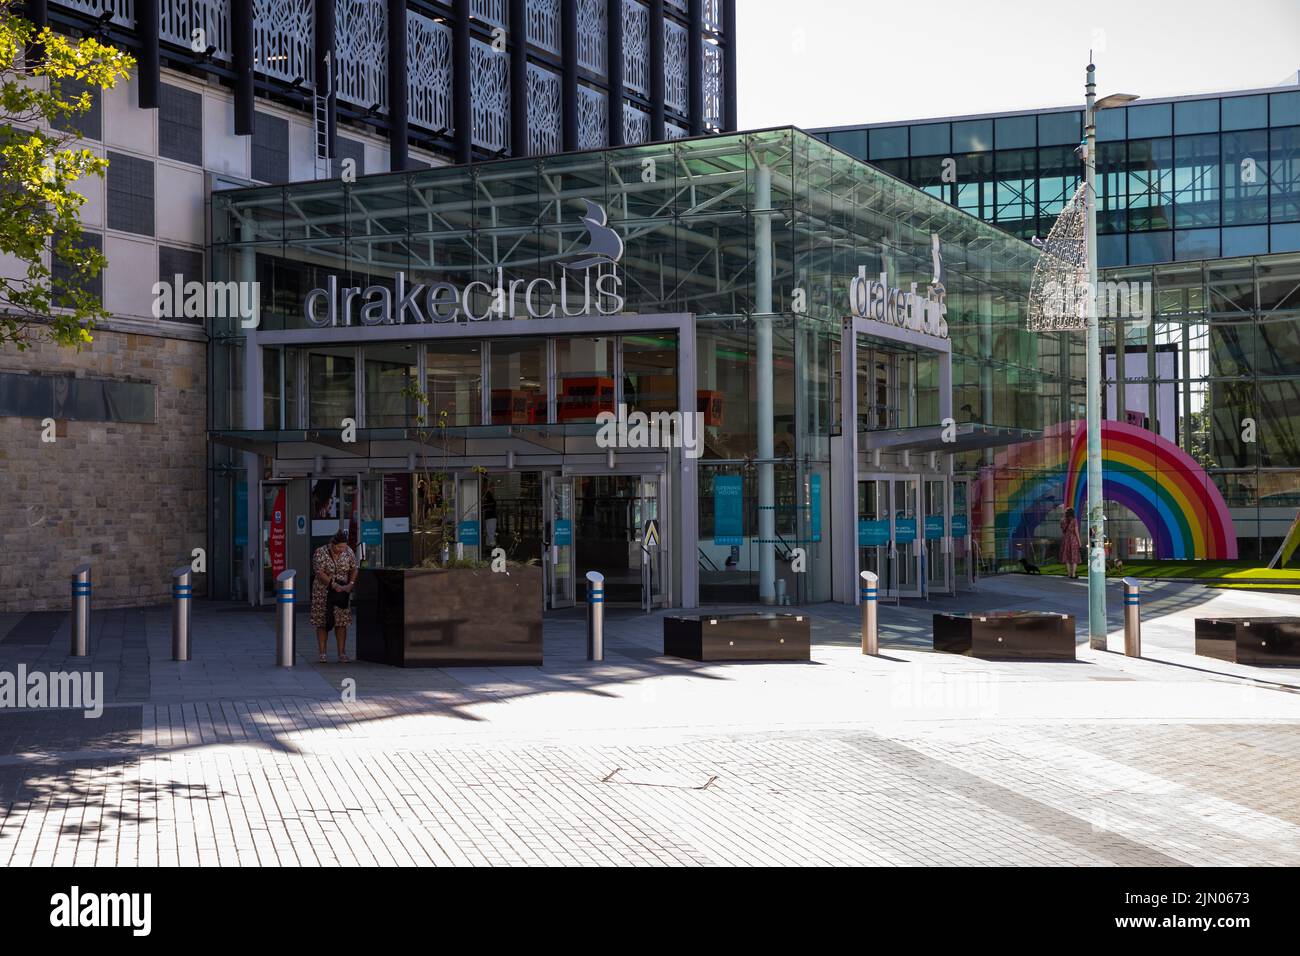 Drake Circus shopping mall in Plymouth on a hot sunny Day Stock Photo